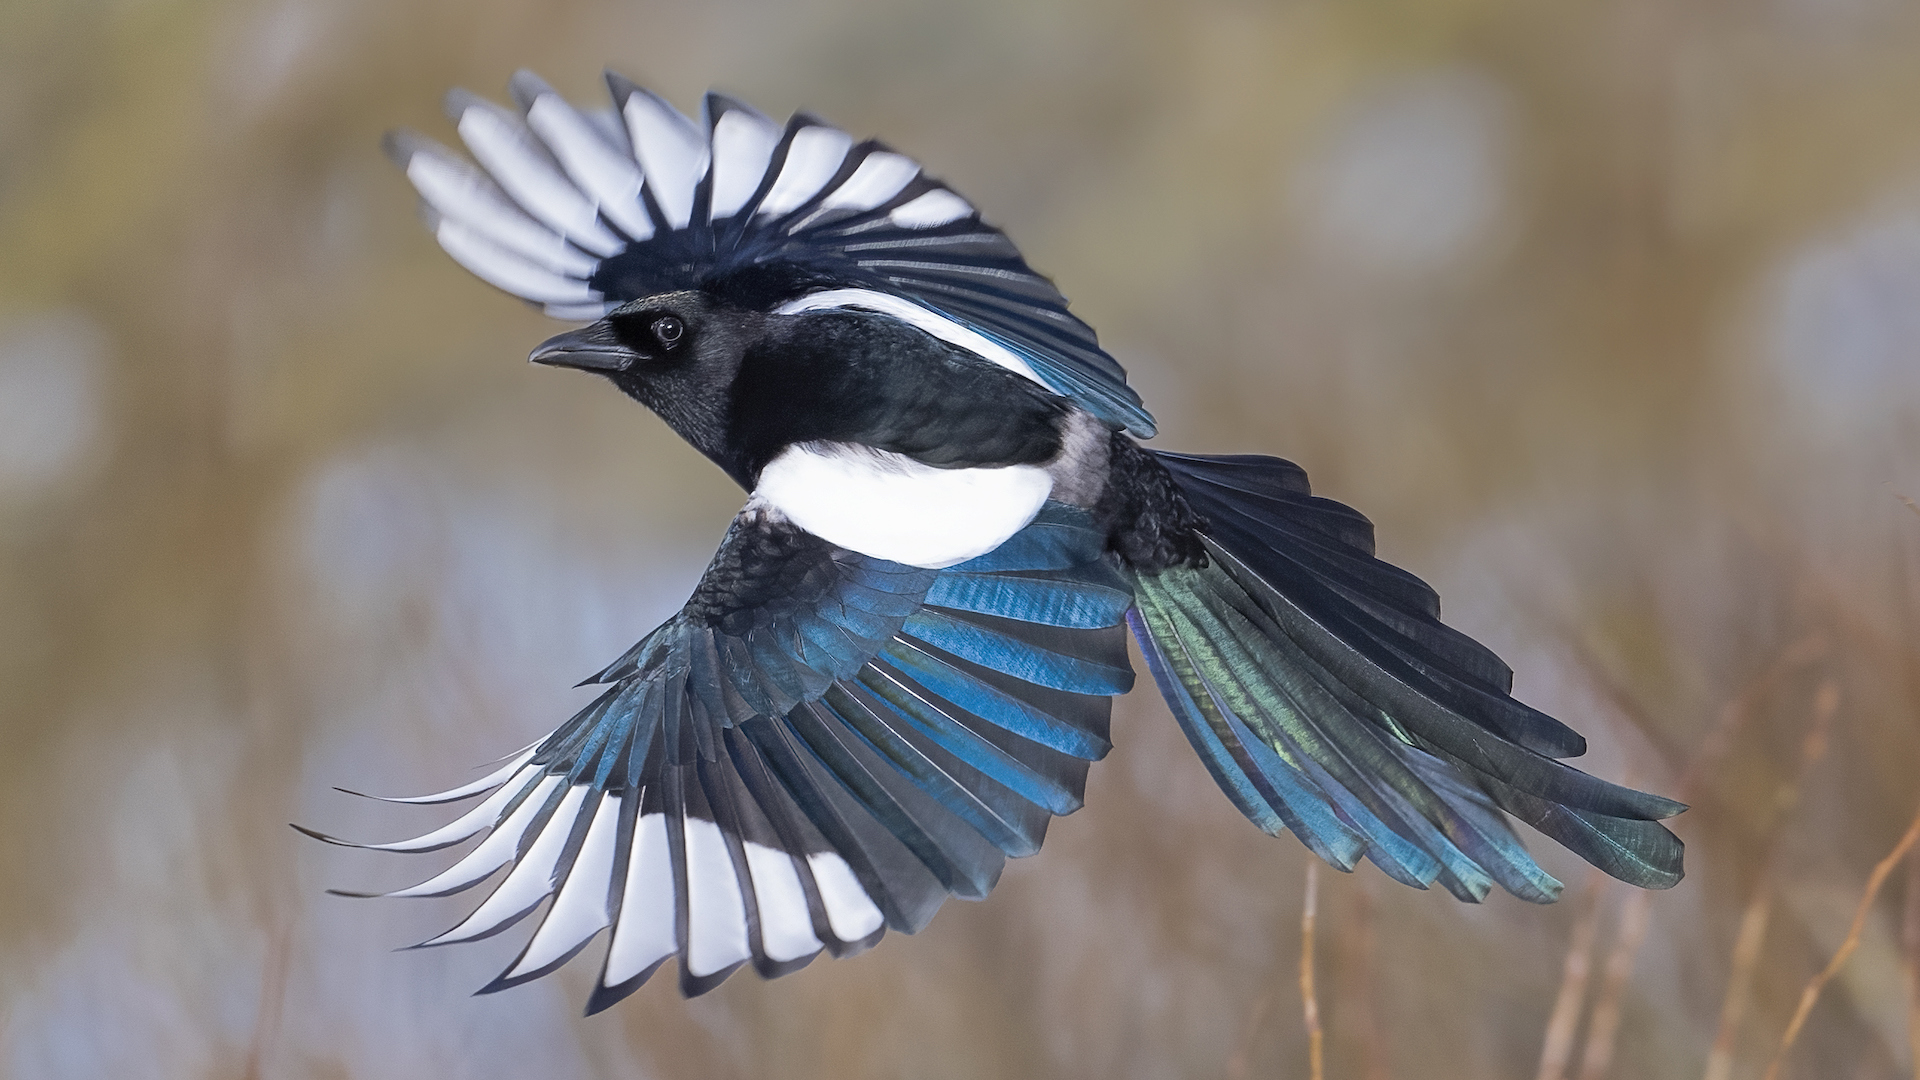 A photograph of a flying magpie with its wings outstreched.